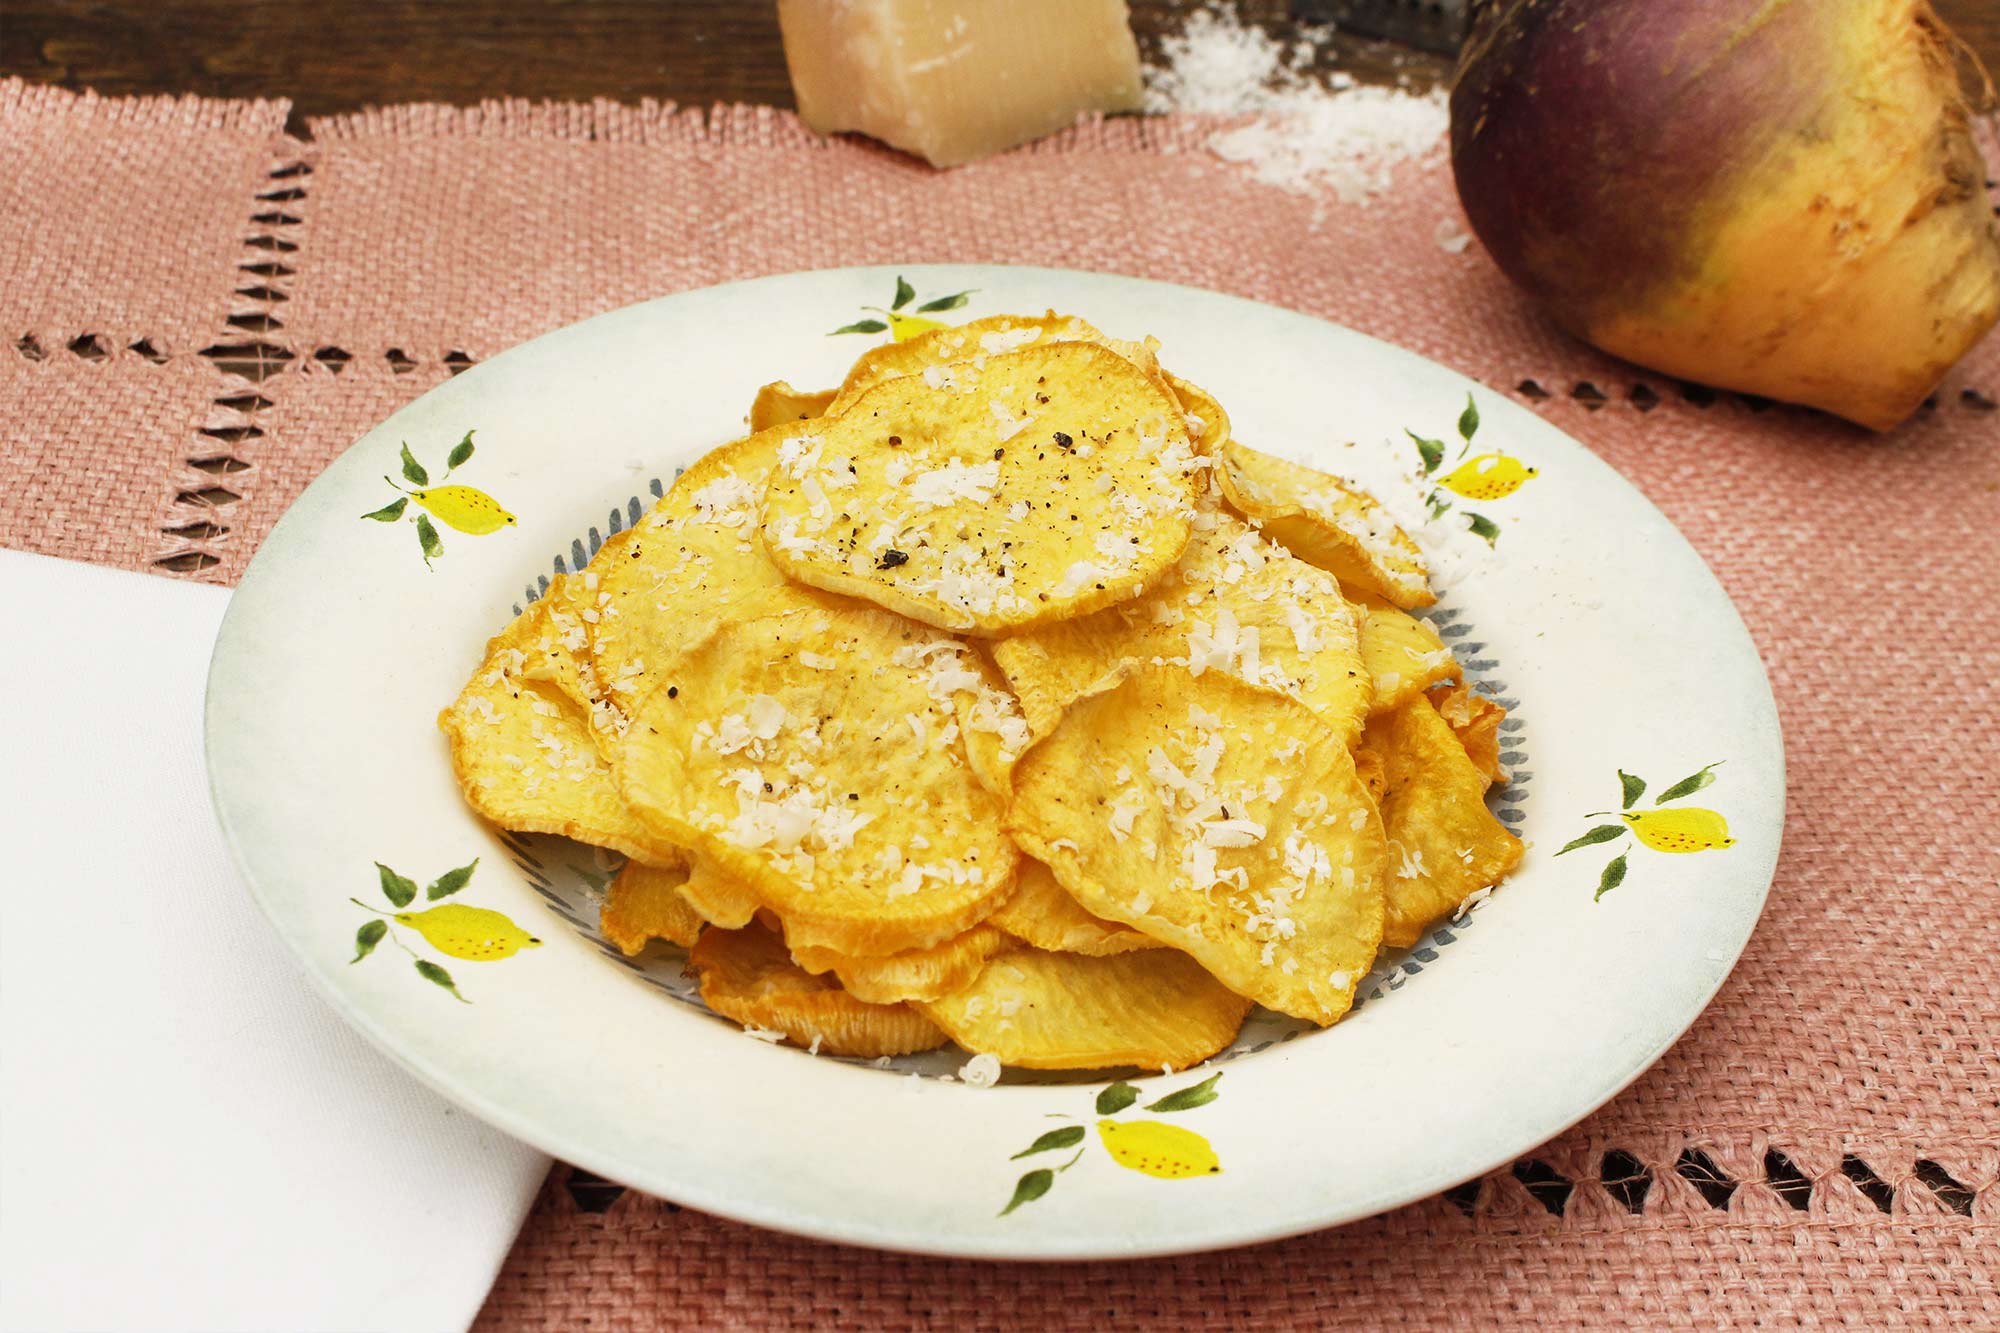 Turnip and Parmesan Chips